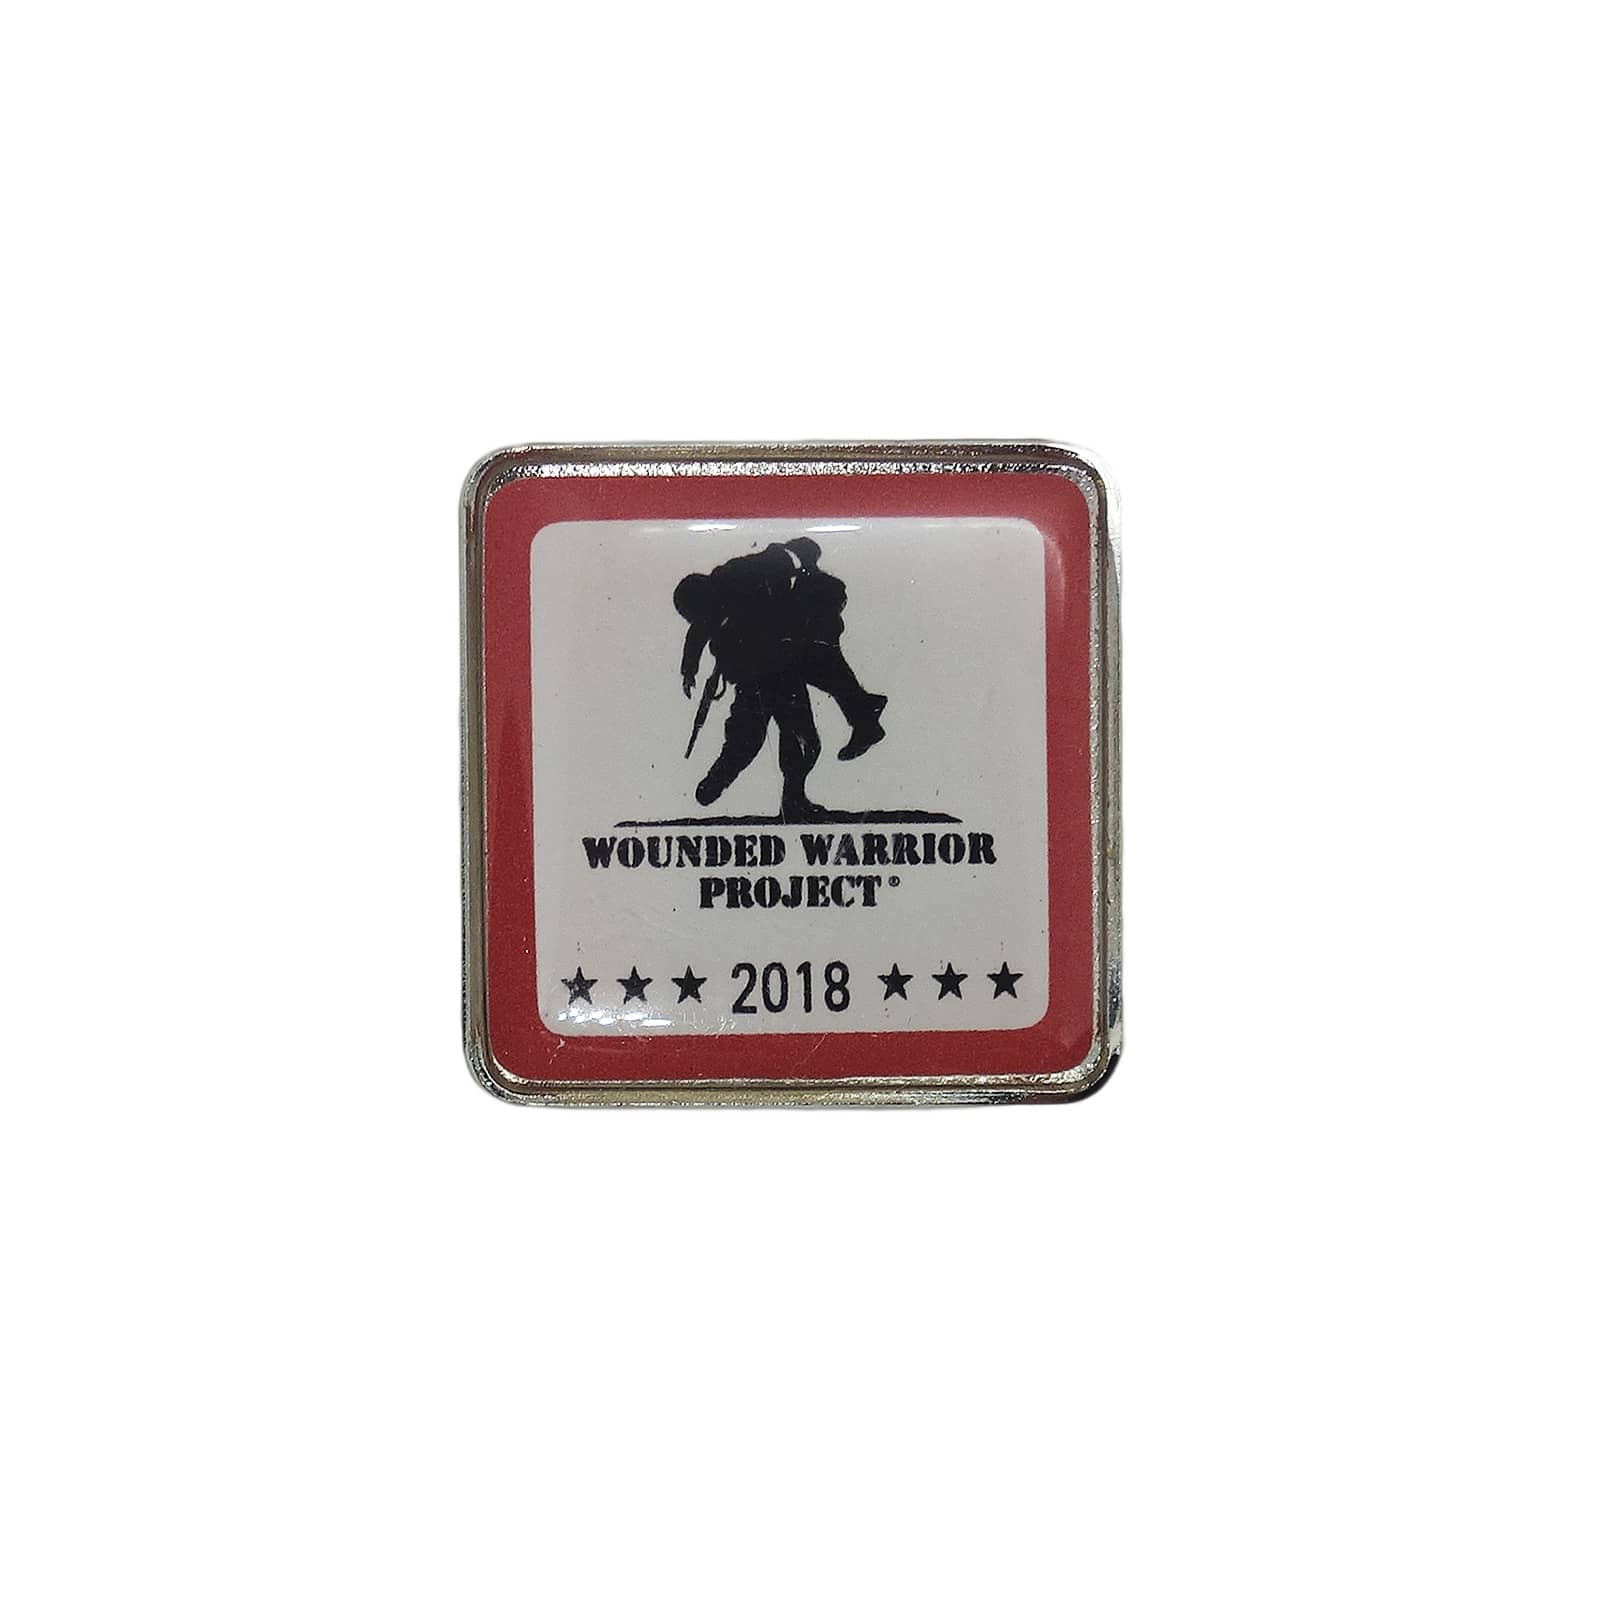 WOUNDED WARRIOR PROJECT 2018 ピンズ 留め具付き ミリタリー関連